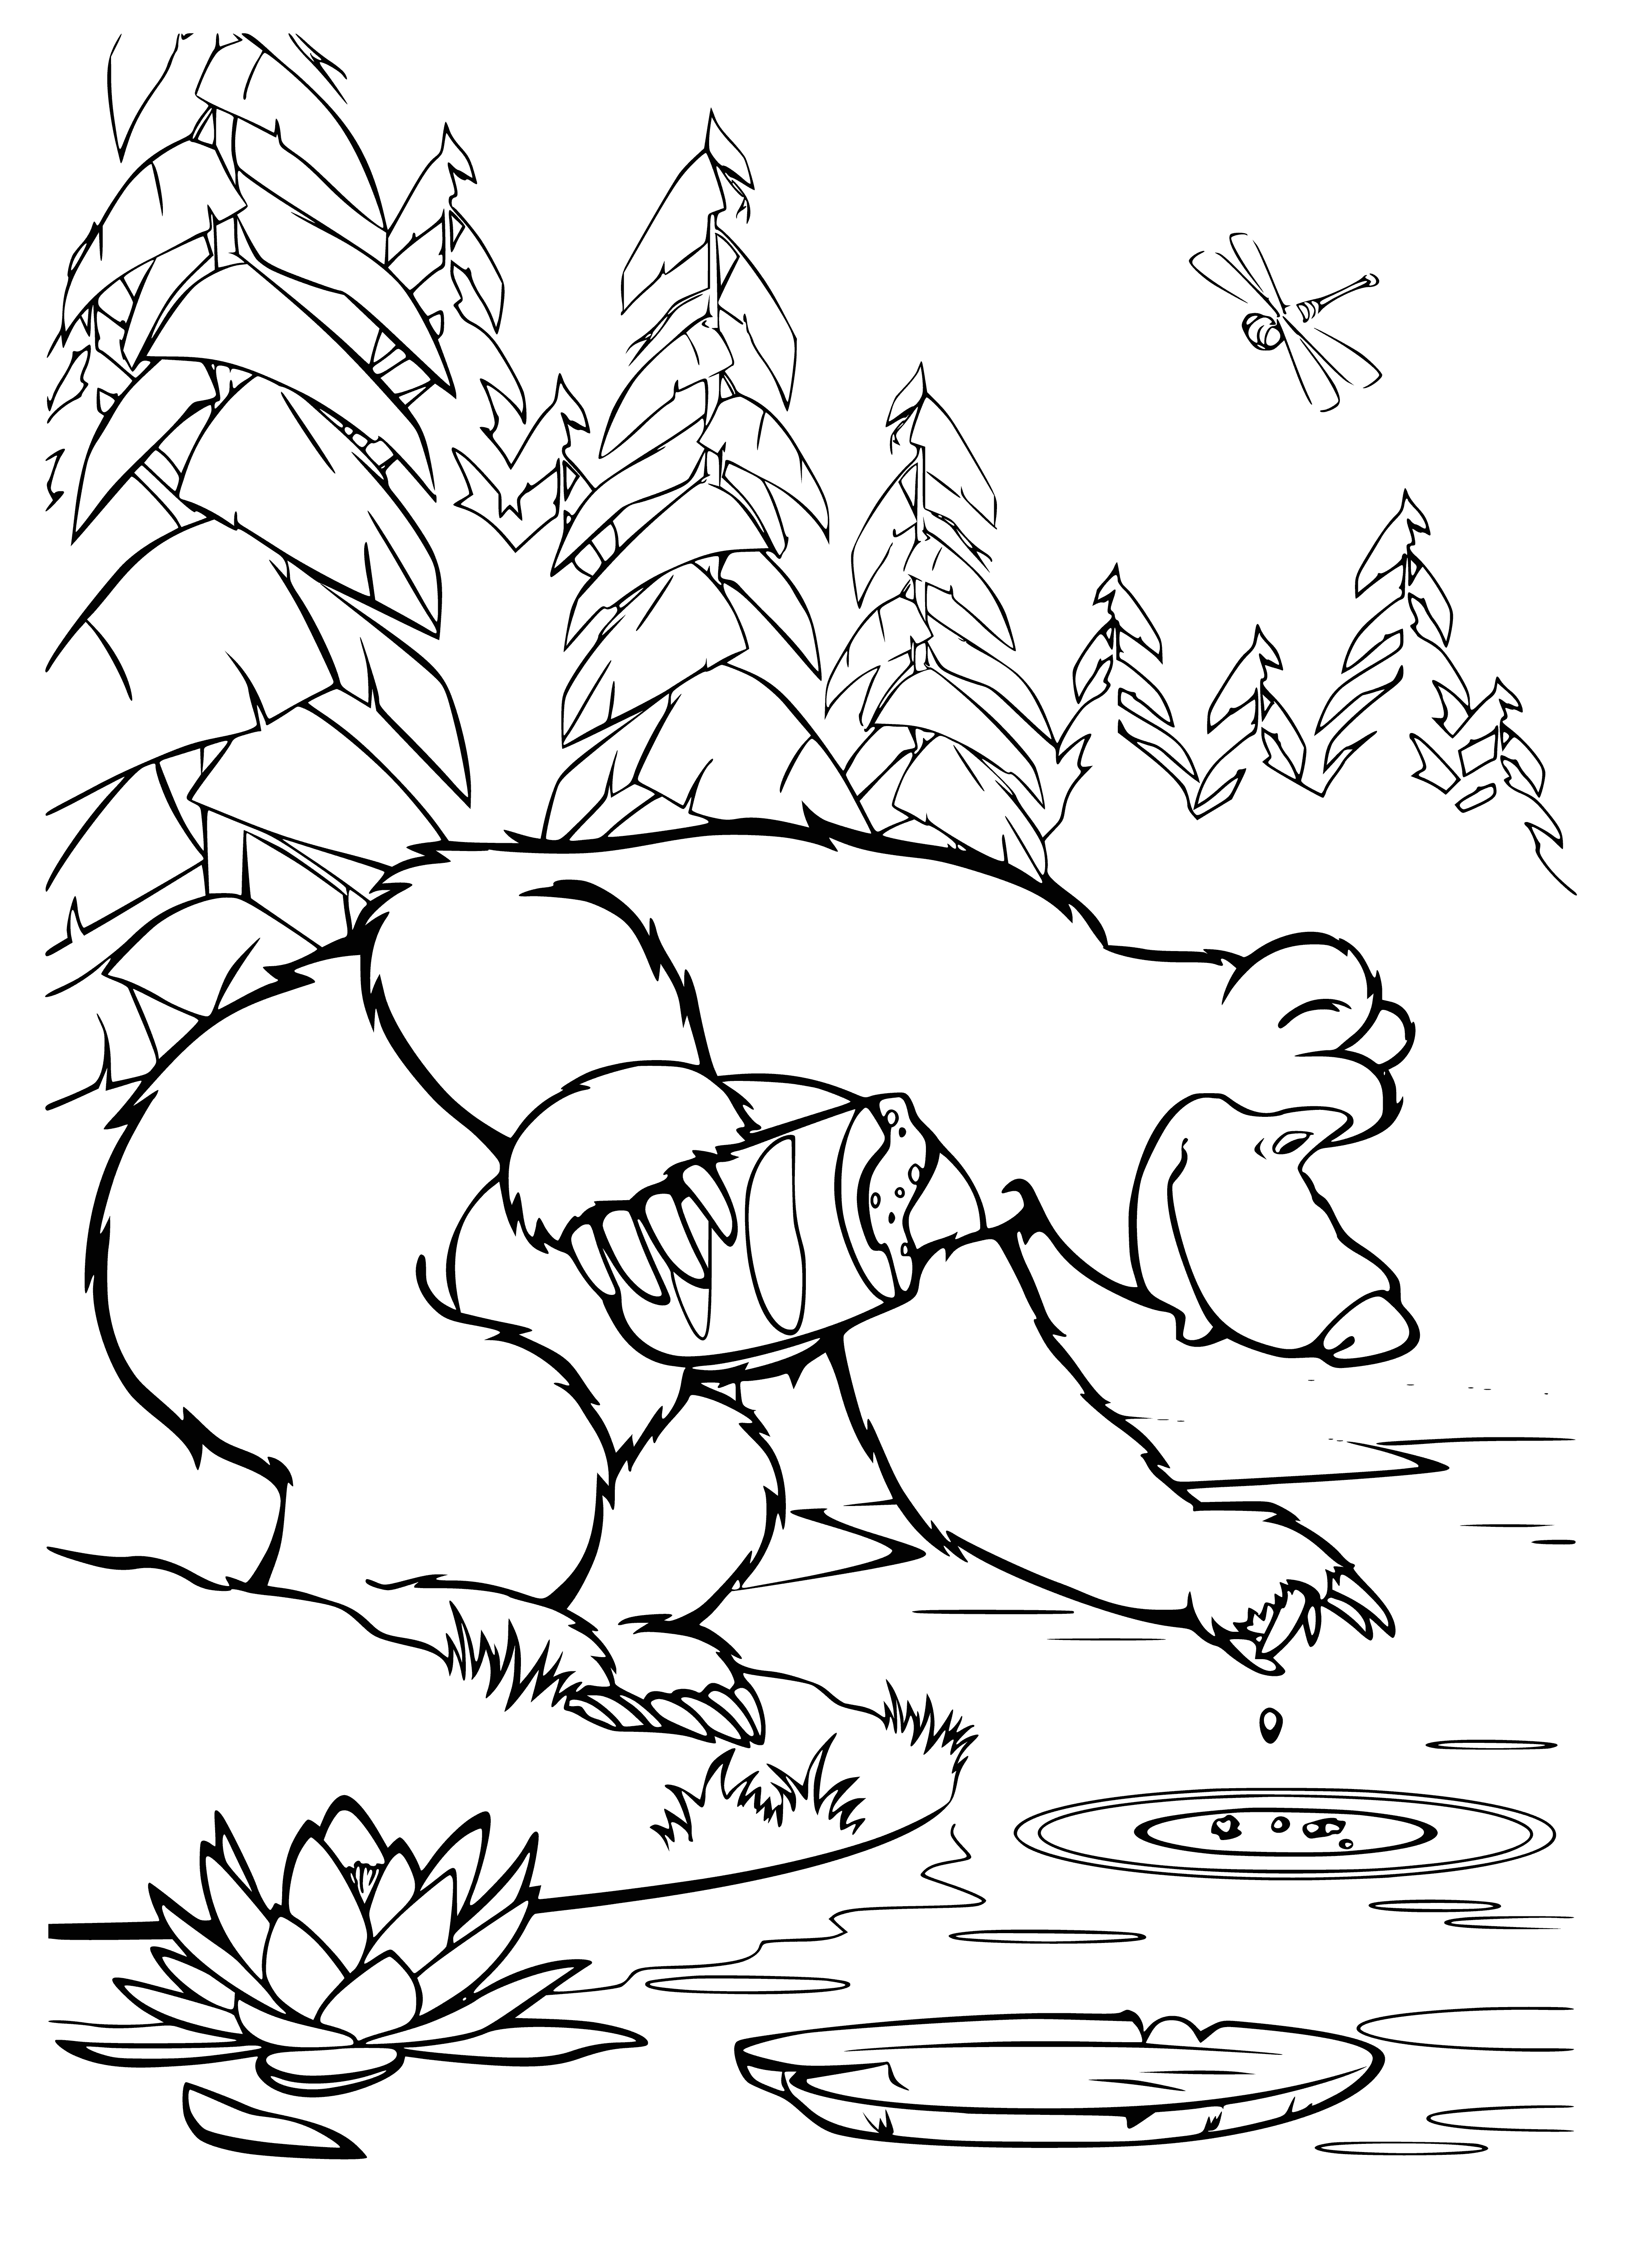 coloring page: Masha stands near a pond with a fish in hand and a fishing net, happy to be enjoying a day outdoors.